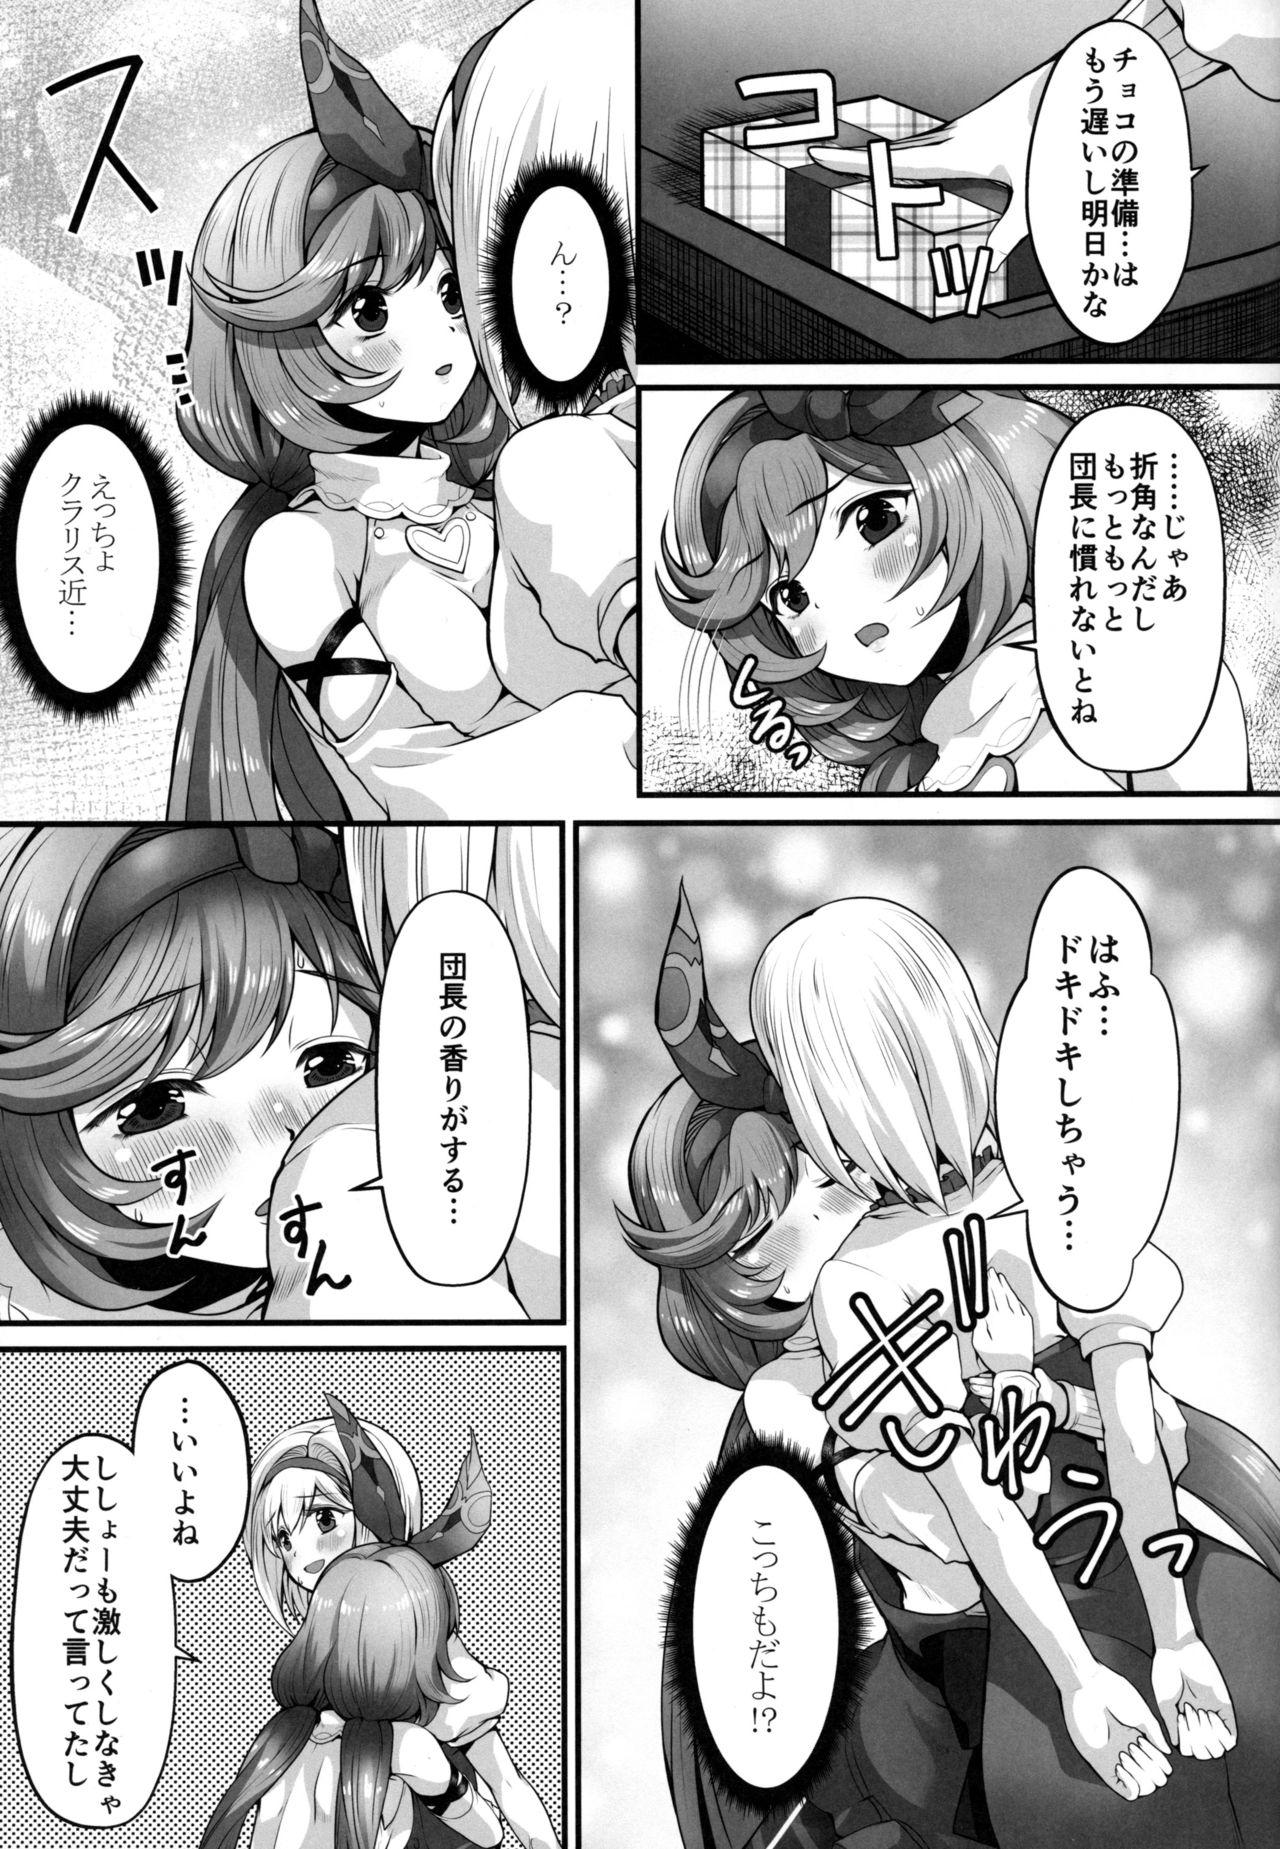 Edging LIKE A DOLL - Granblue fantasy Squirting - Page 7